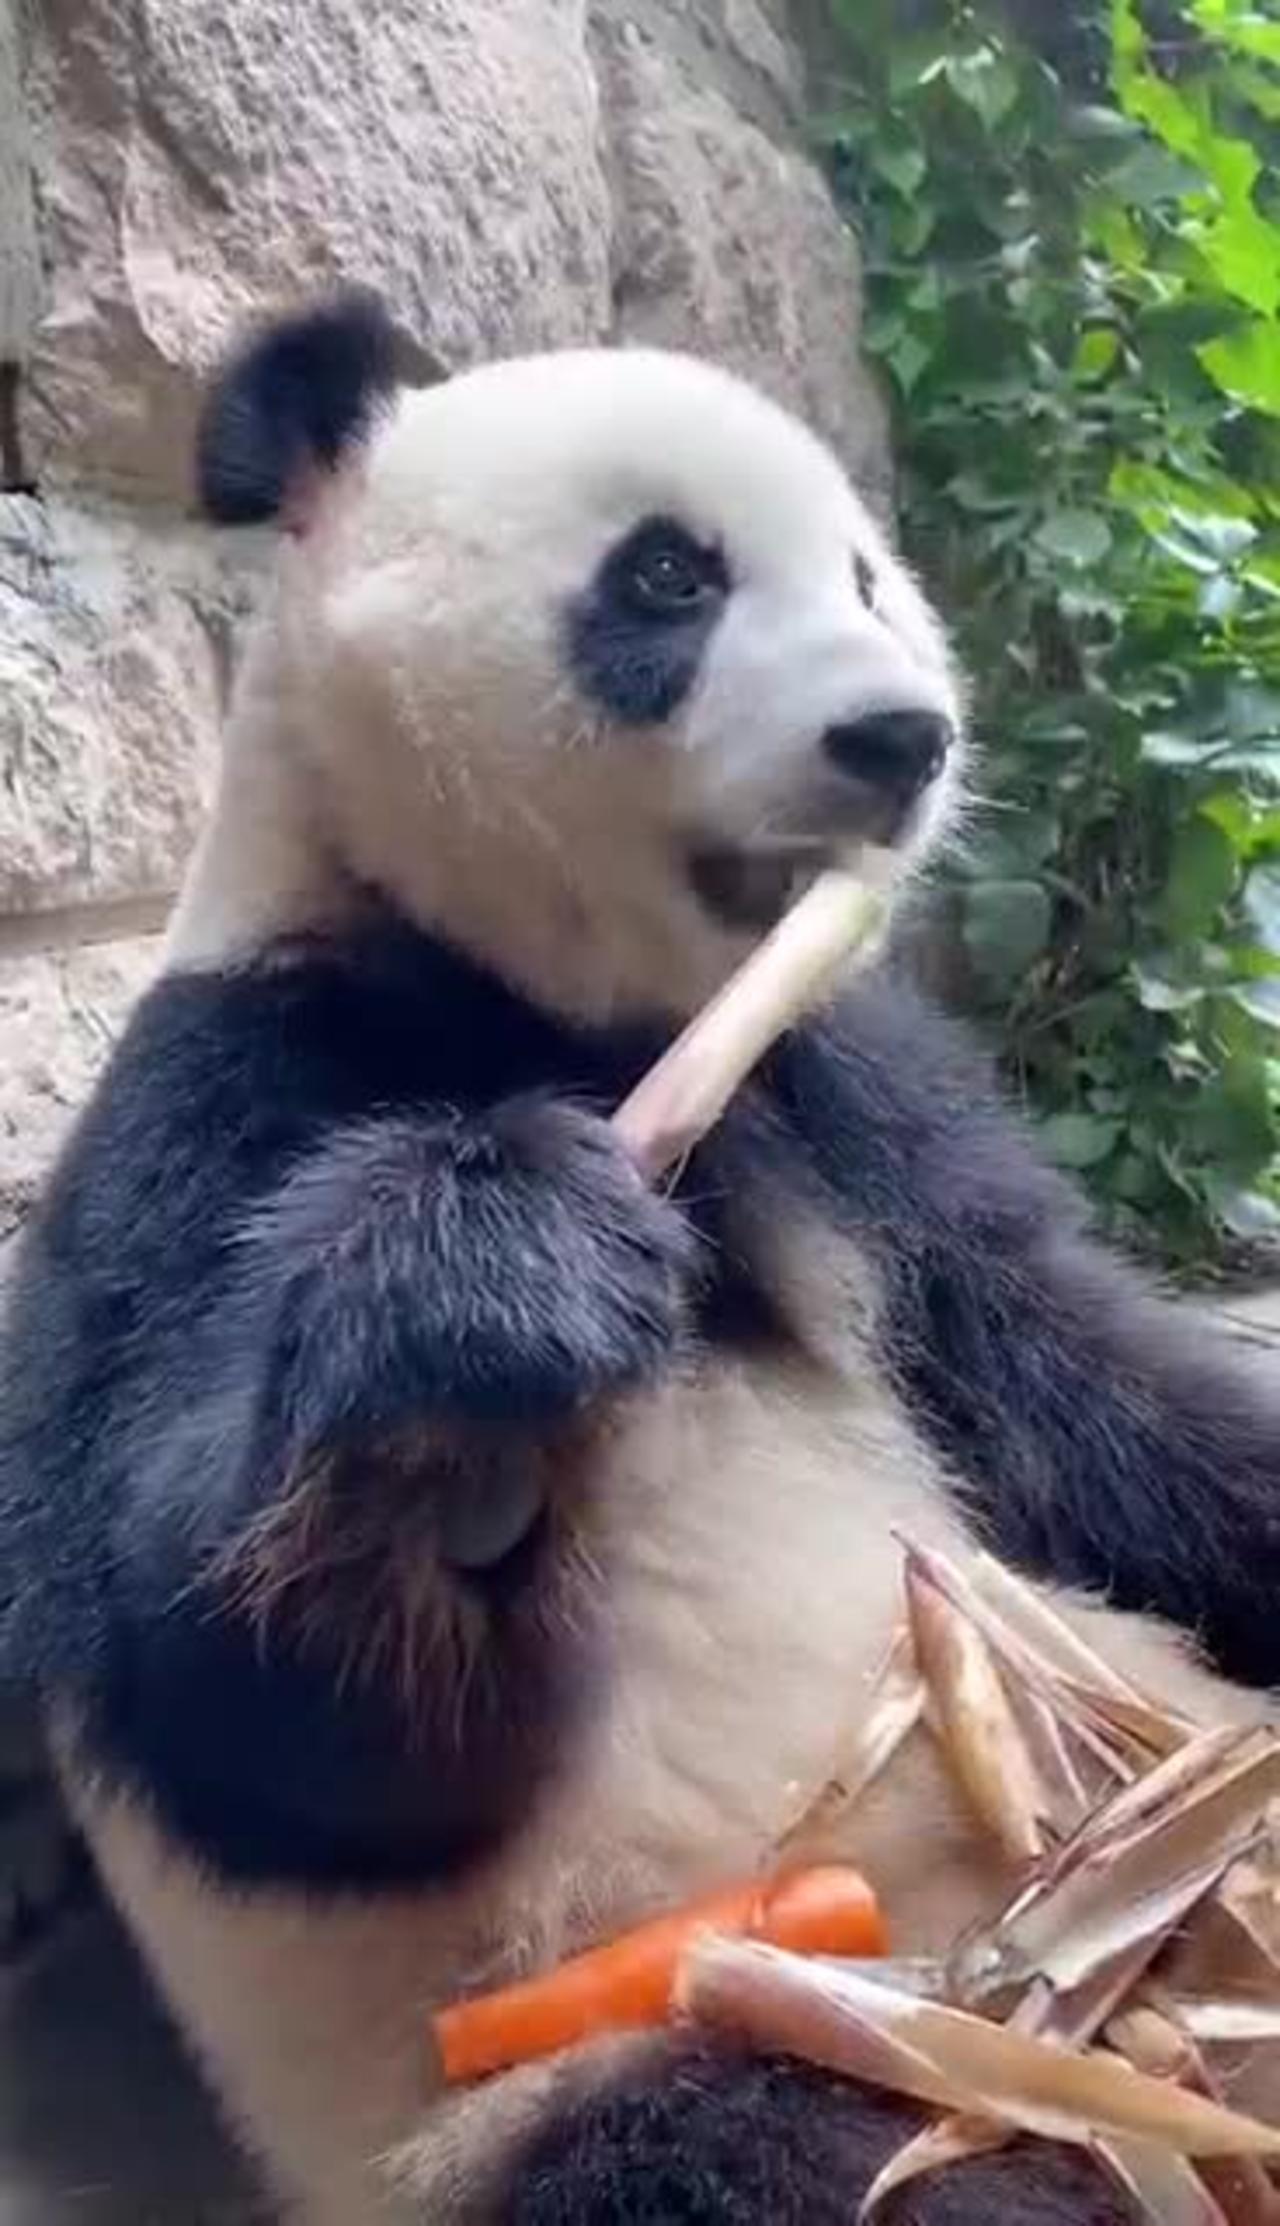 Cute panda is eating bamboo, bamboo is so delicious